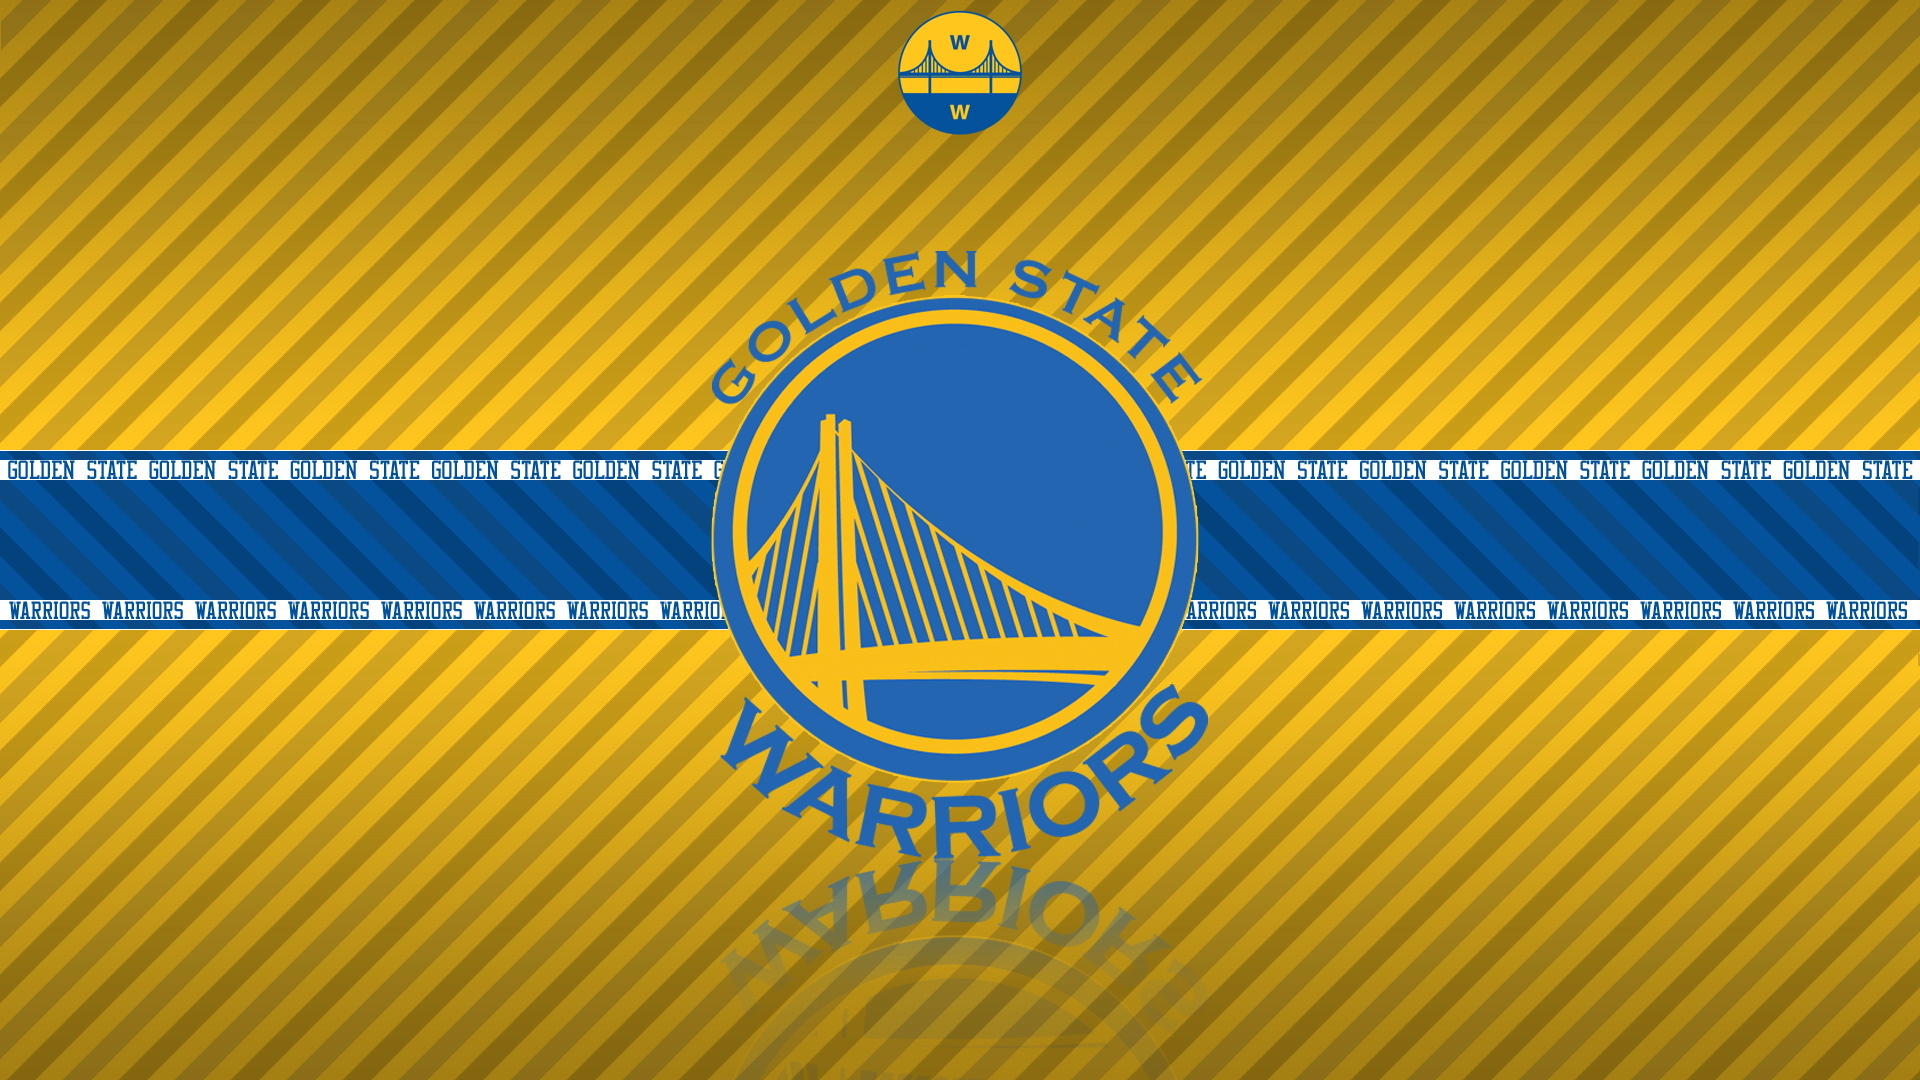 Golden State Warriors: The team won back-to-back NBA championships in 2017 and 2018. 1920x1080 Full HD Background.